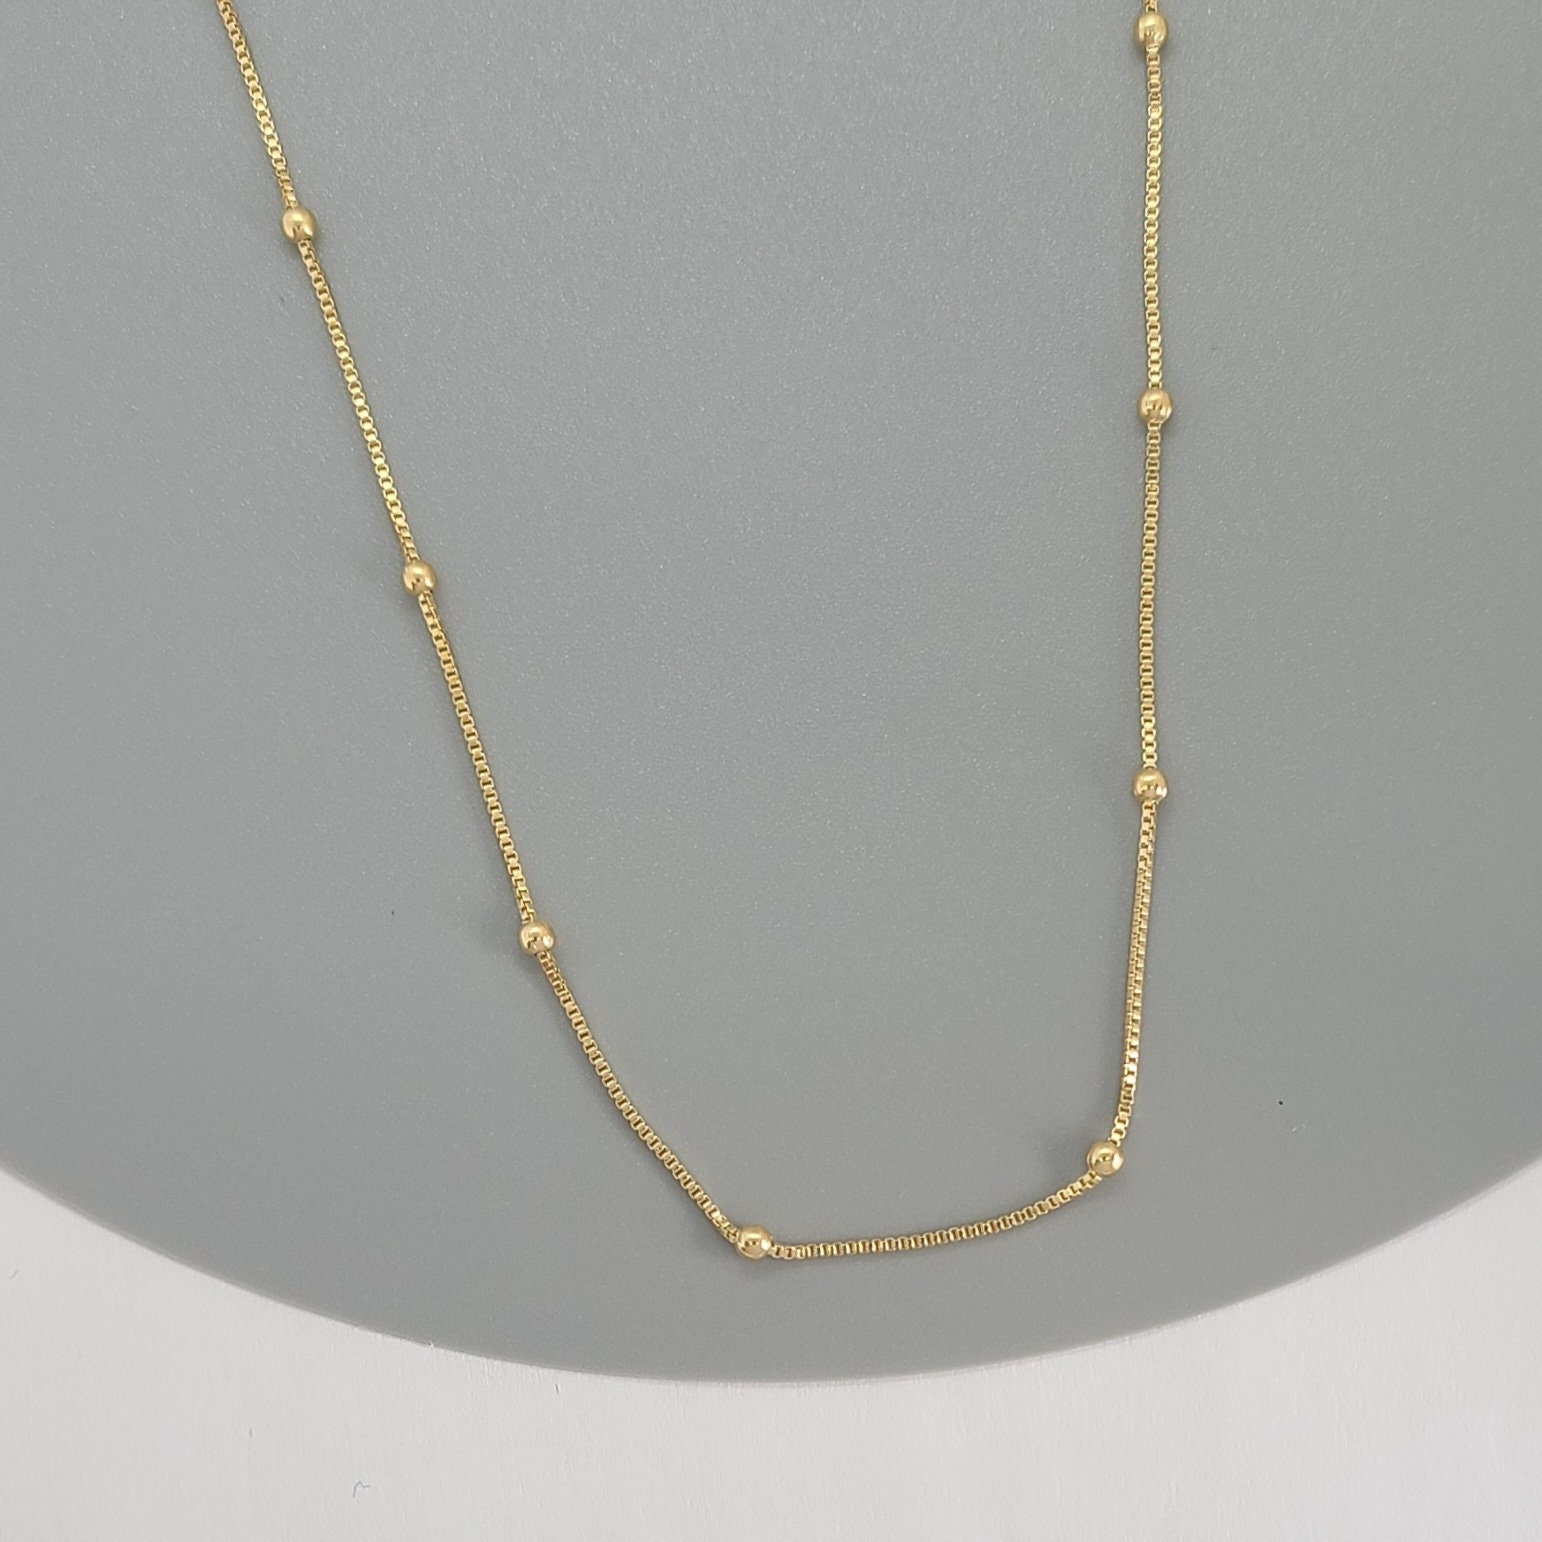 Wholesale Drawn Cable Necklace Chain, 14k Gold Filled Chain, 1.3-4 Mm, Bulk Jewelry  Chain, Unfinished Chain, Gs 